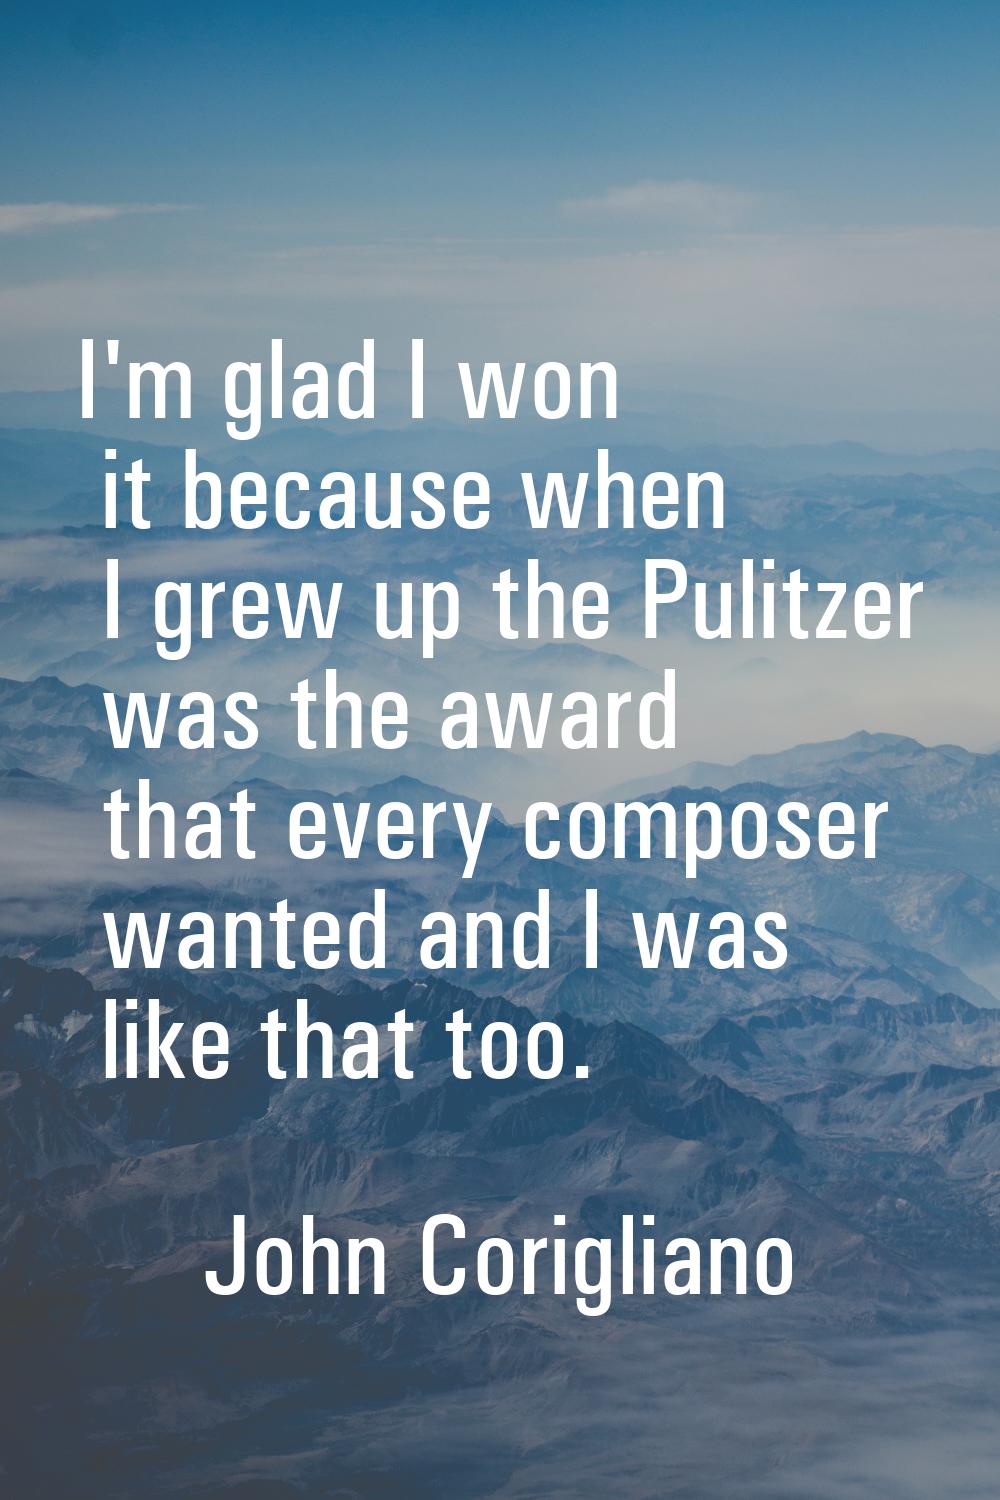 I'm glad I won it because when I grew up the Pulitzer was the award that every composer wanted and 